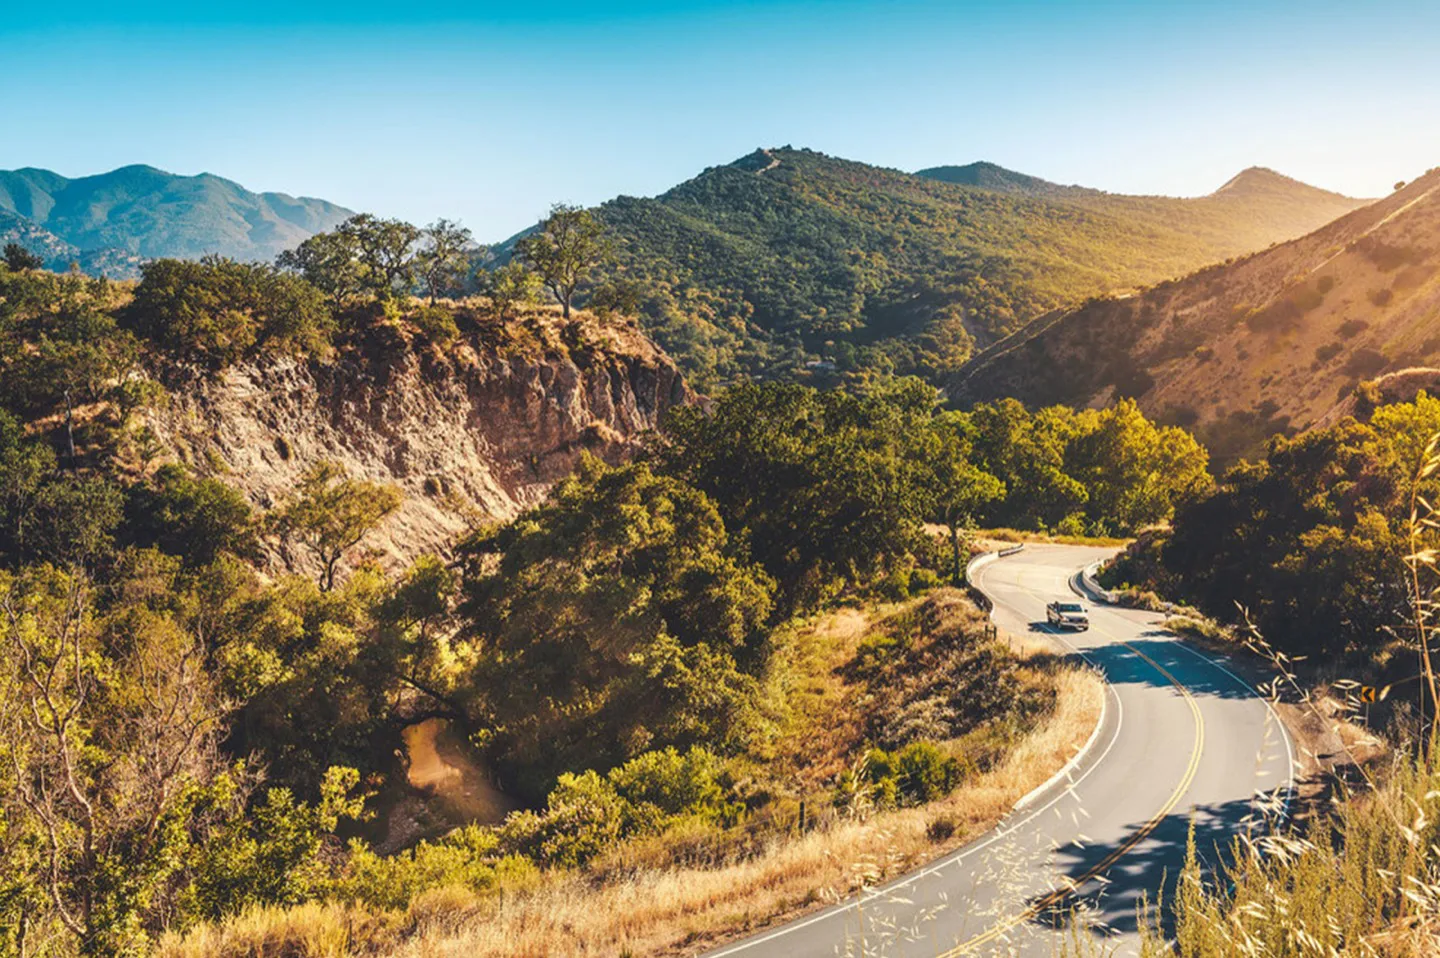 Drive the best roads of the Los Padres National Forest from LA to Paso Robles